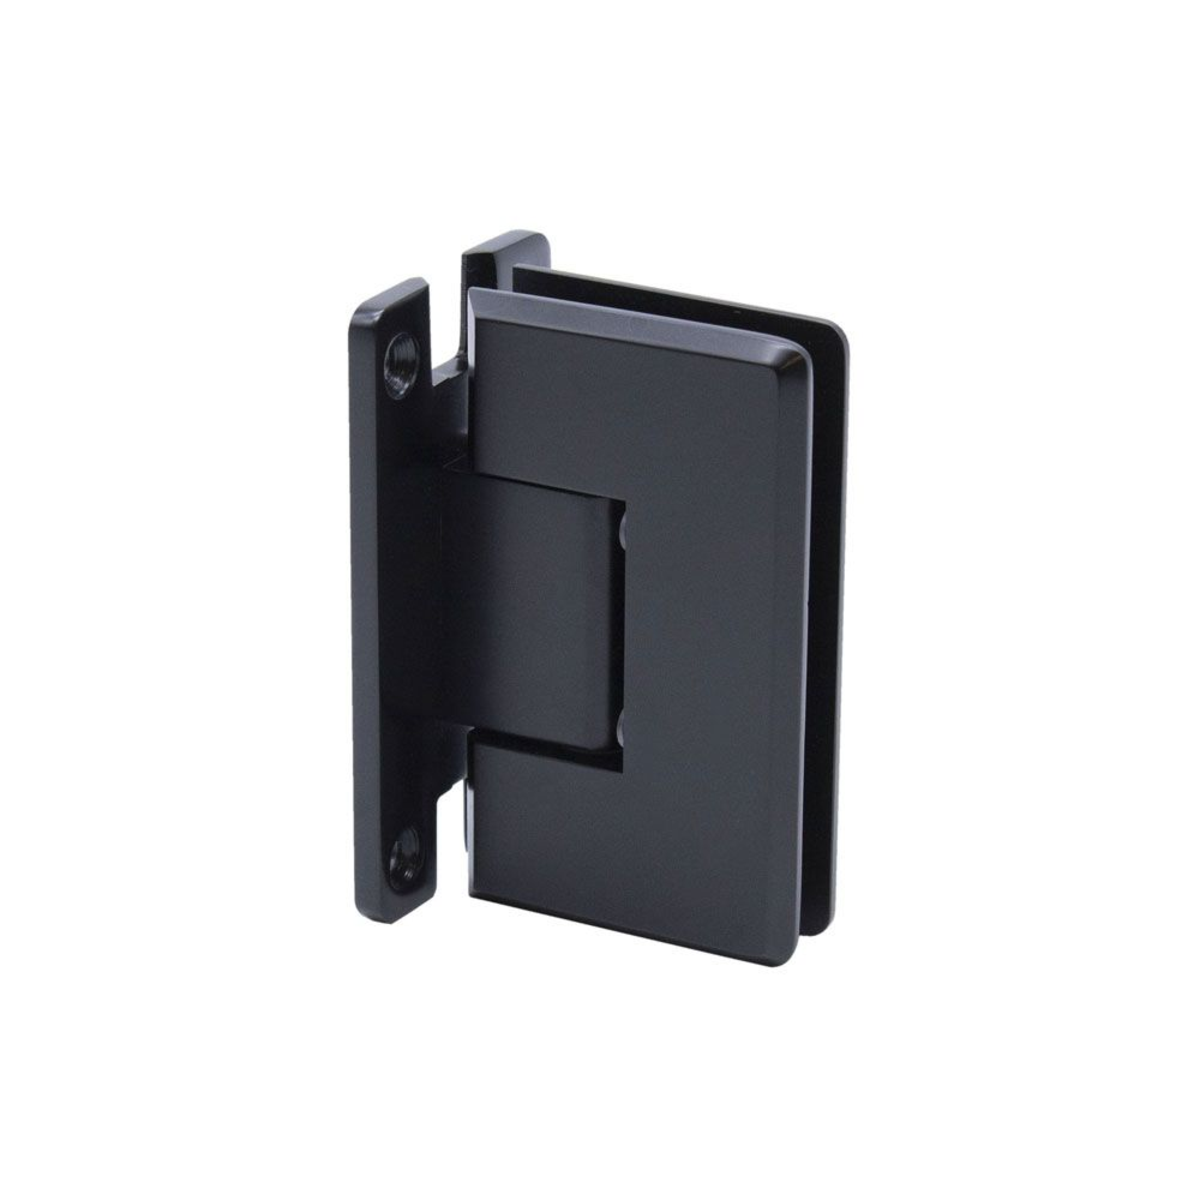 Wall to Glass "H" Back Plate Hinge- Beveled